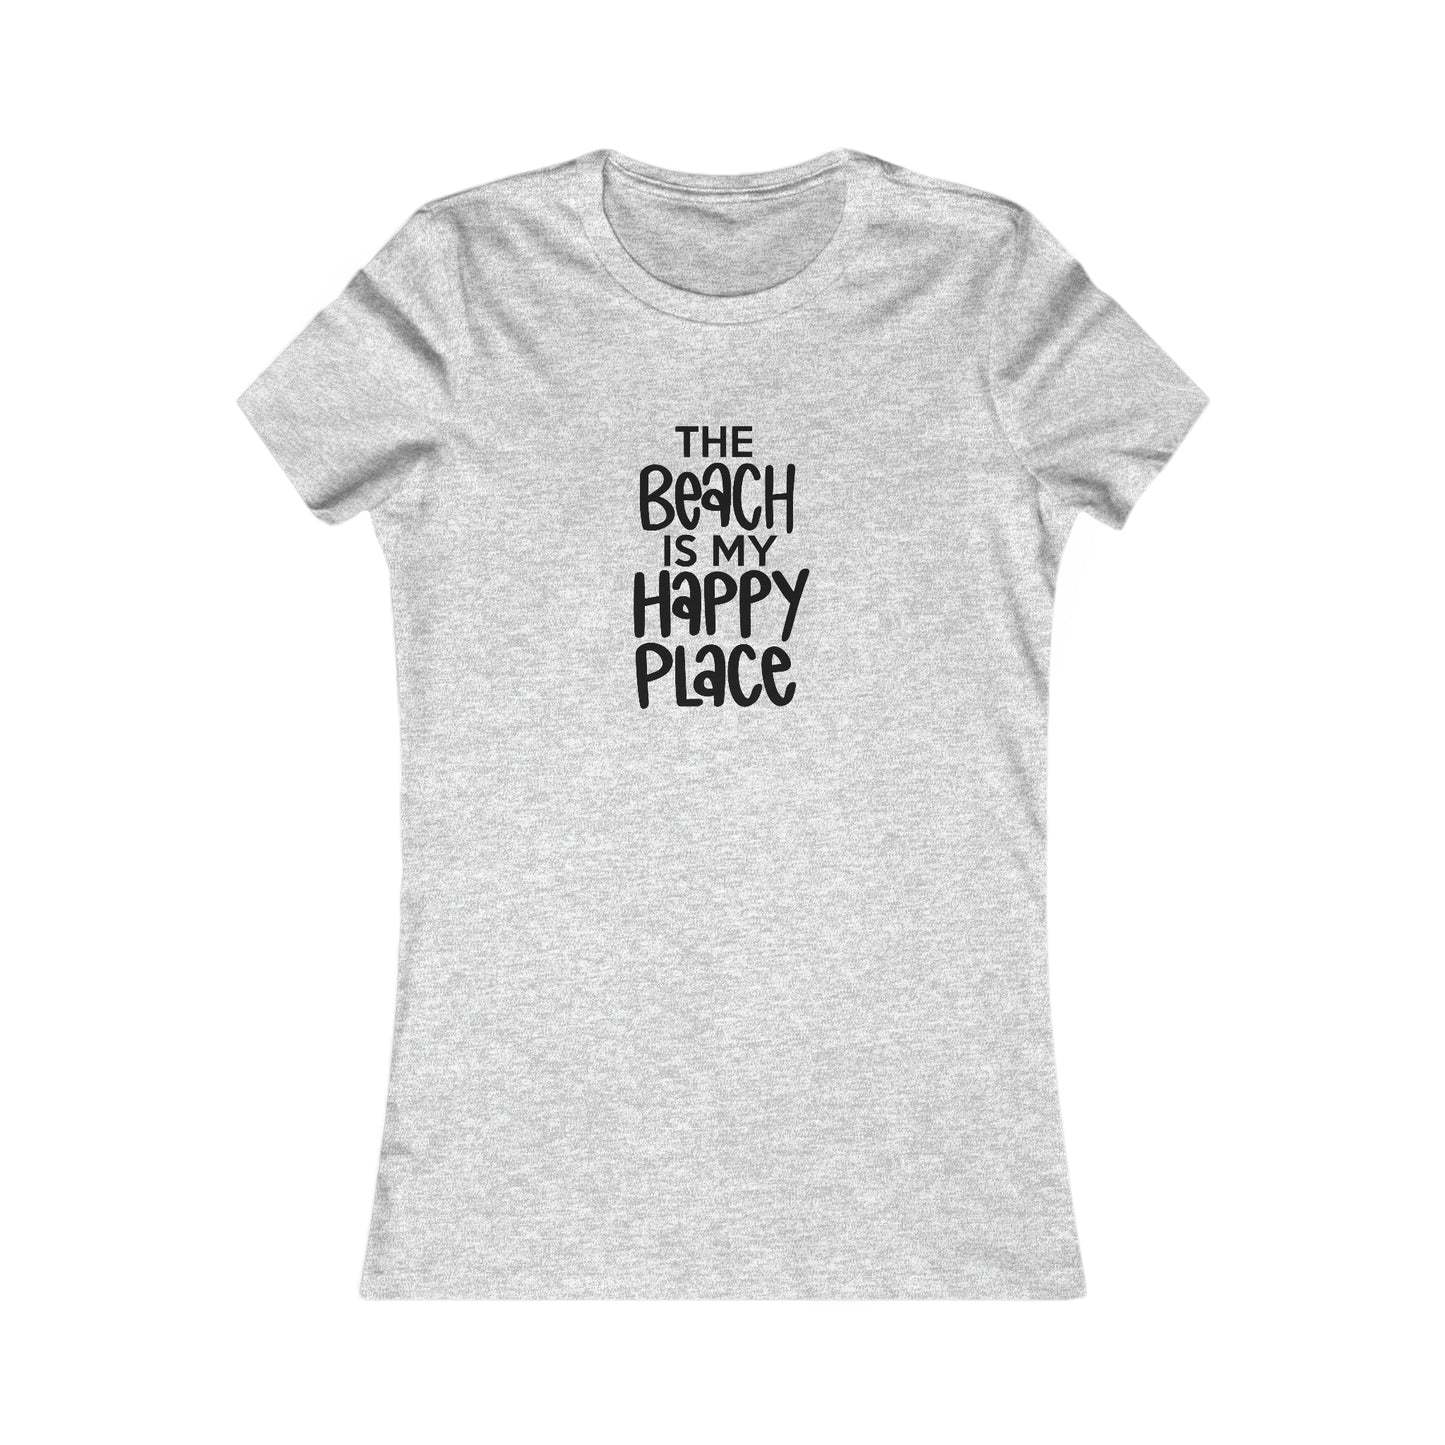 The Beach is My Happy Place - Women's Favorite Tee -